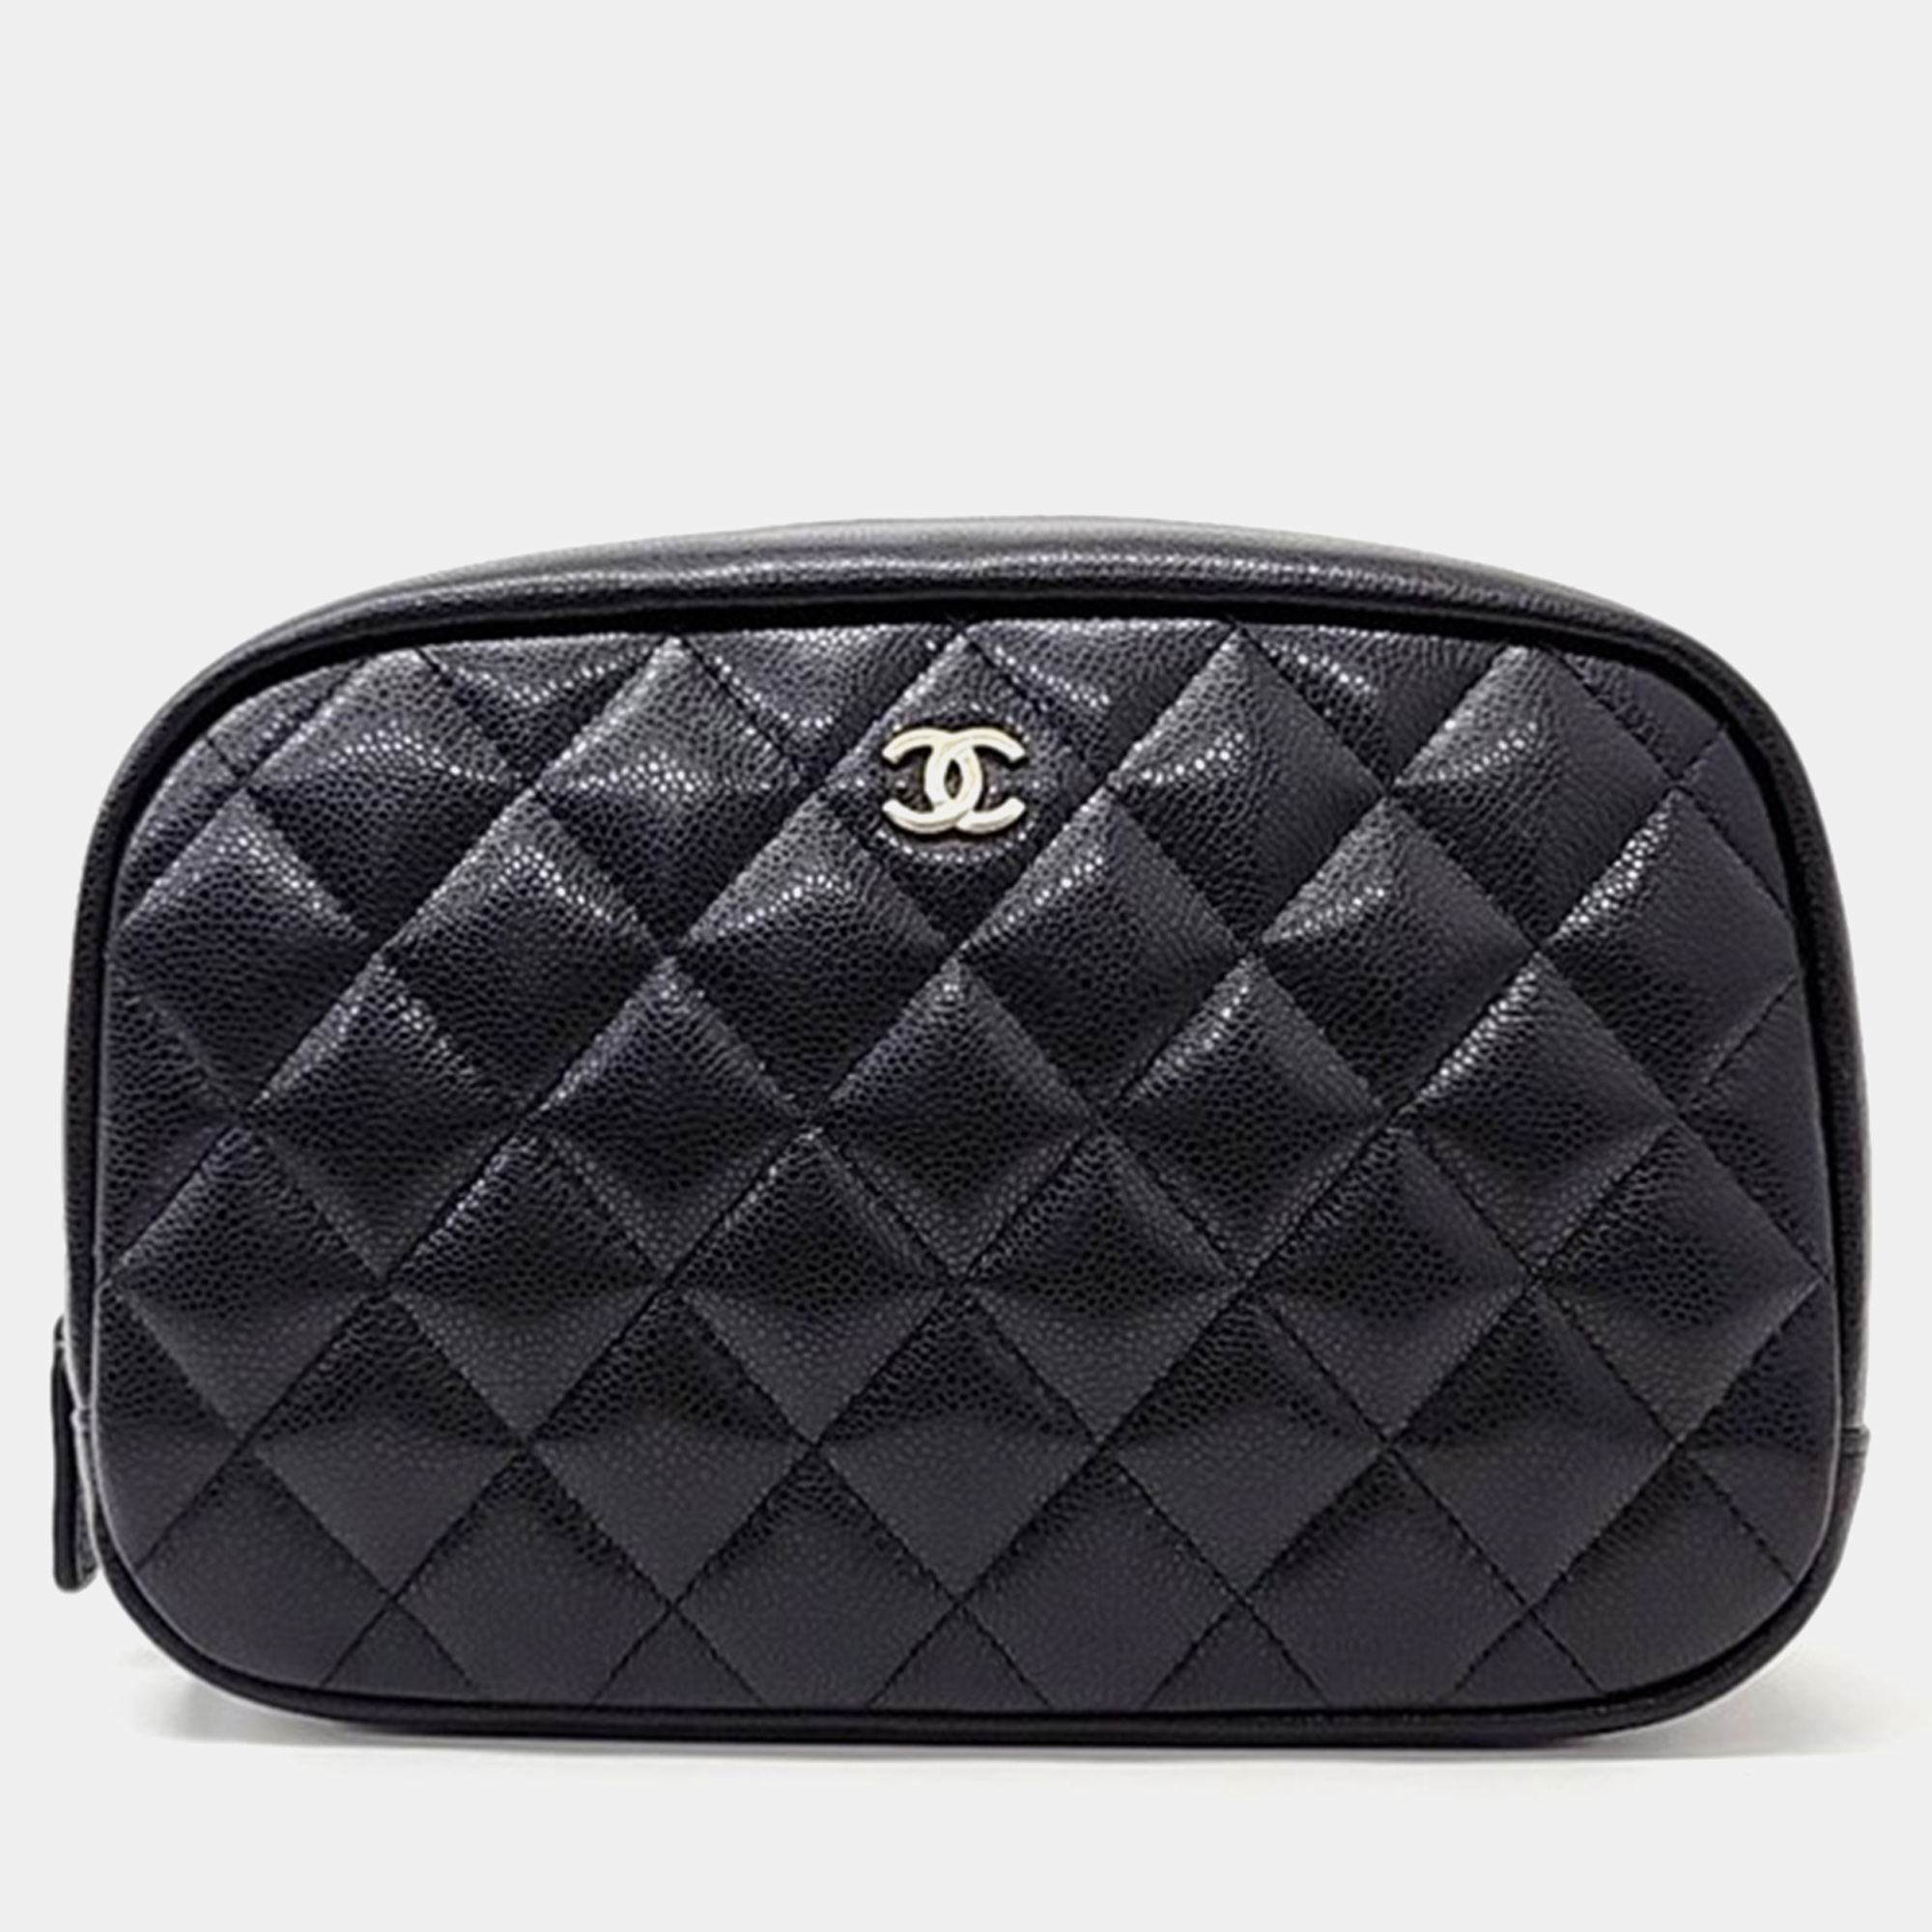 Chanel black caviar leather pouch